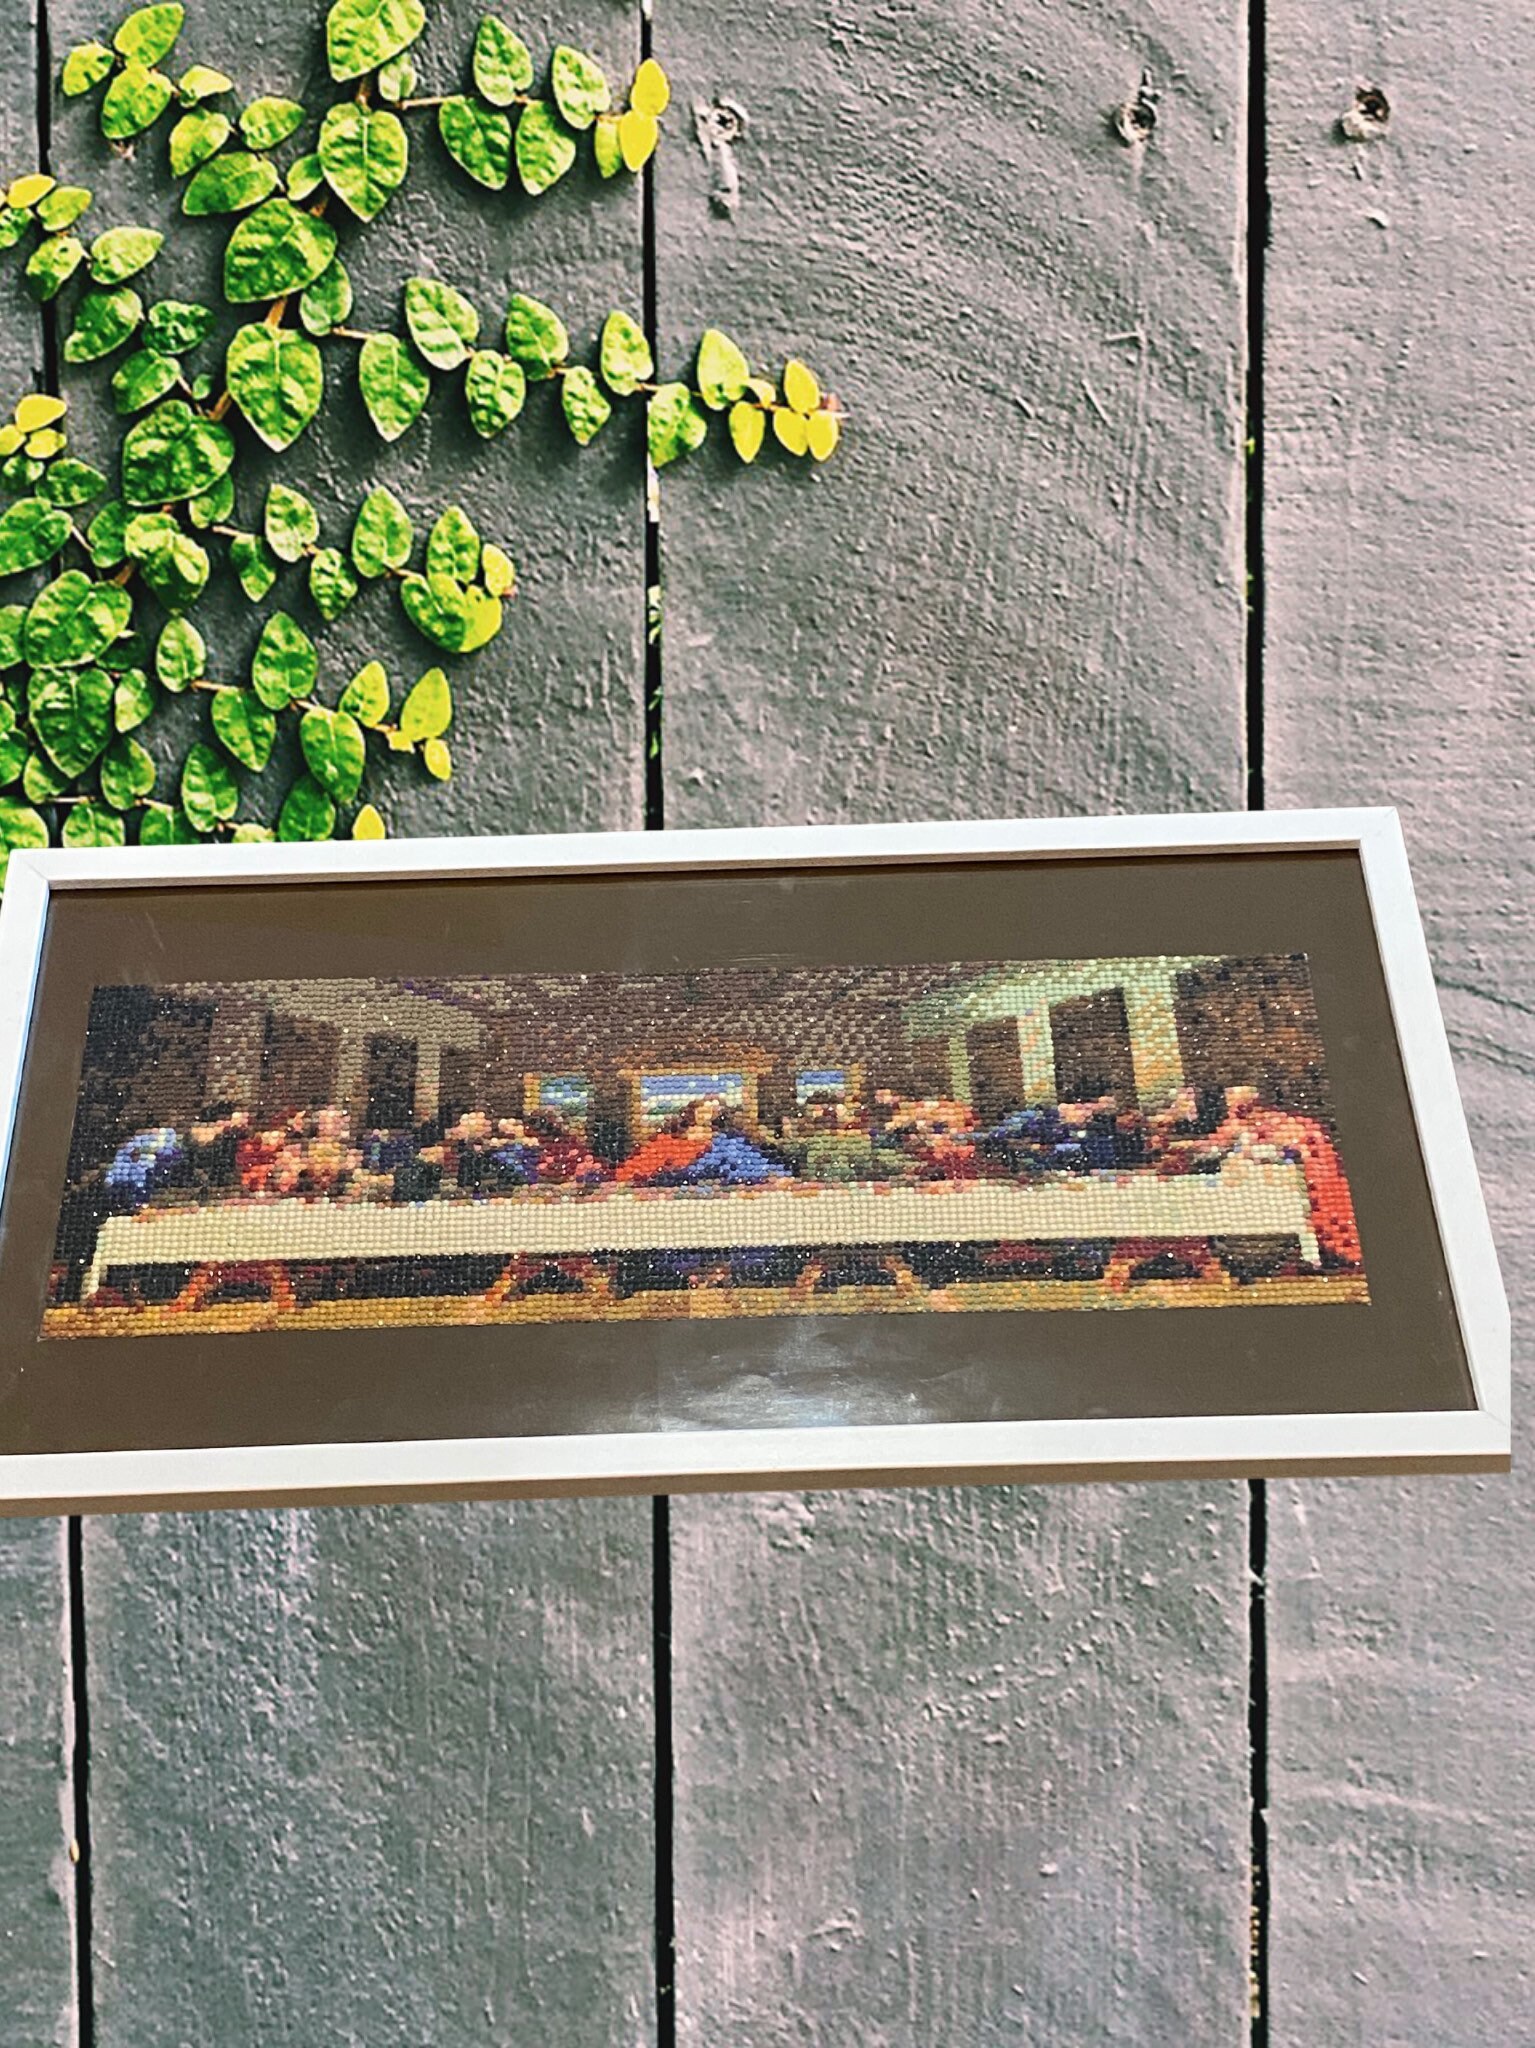 The Last Supper 5D Diamond Painting Kit  Full Square/Round Drill Embr–  Diamond Paintings Store